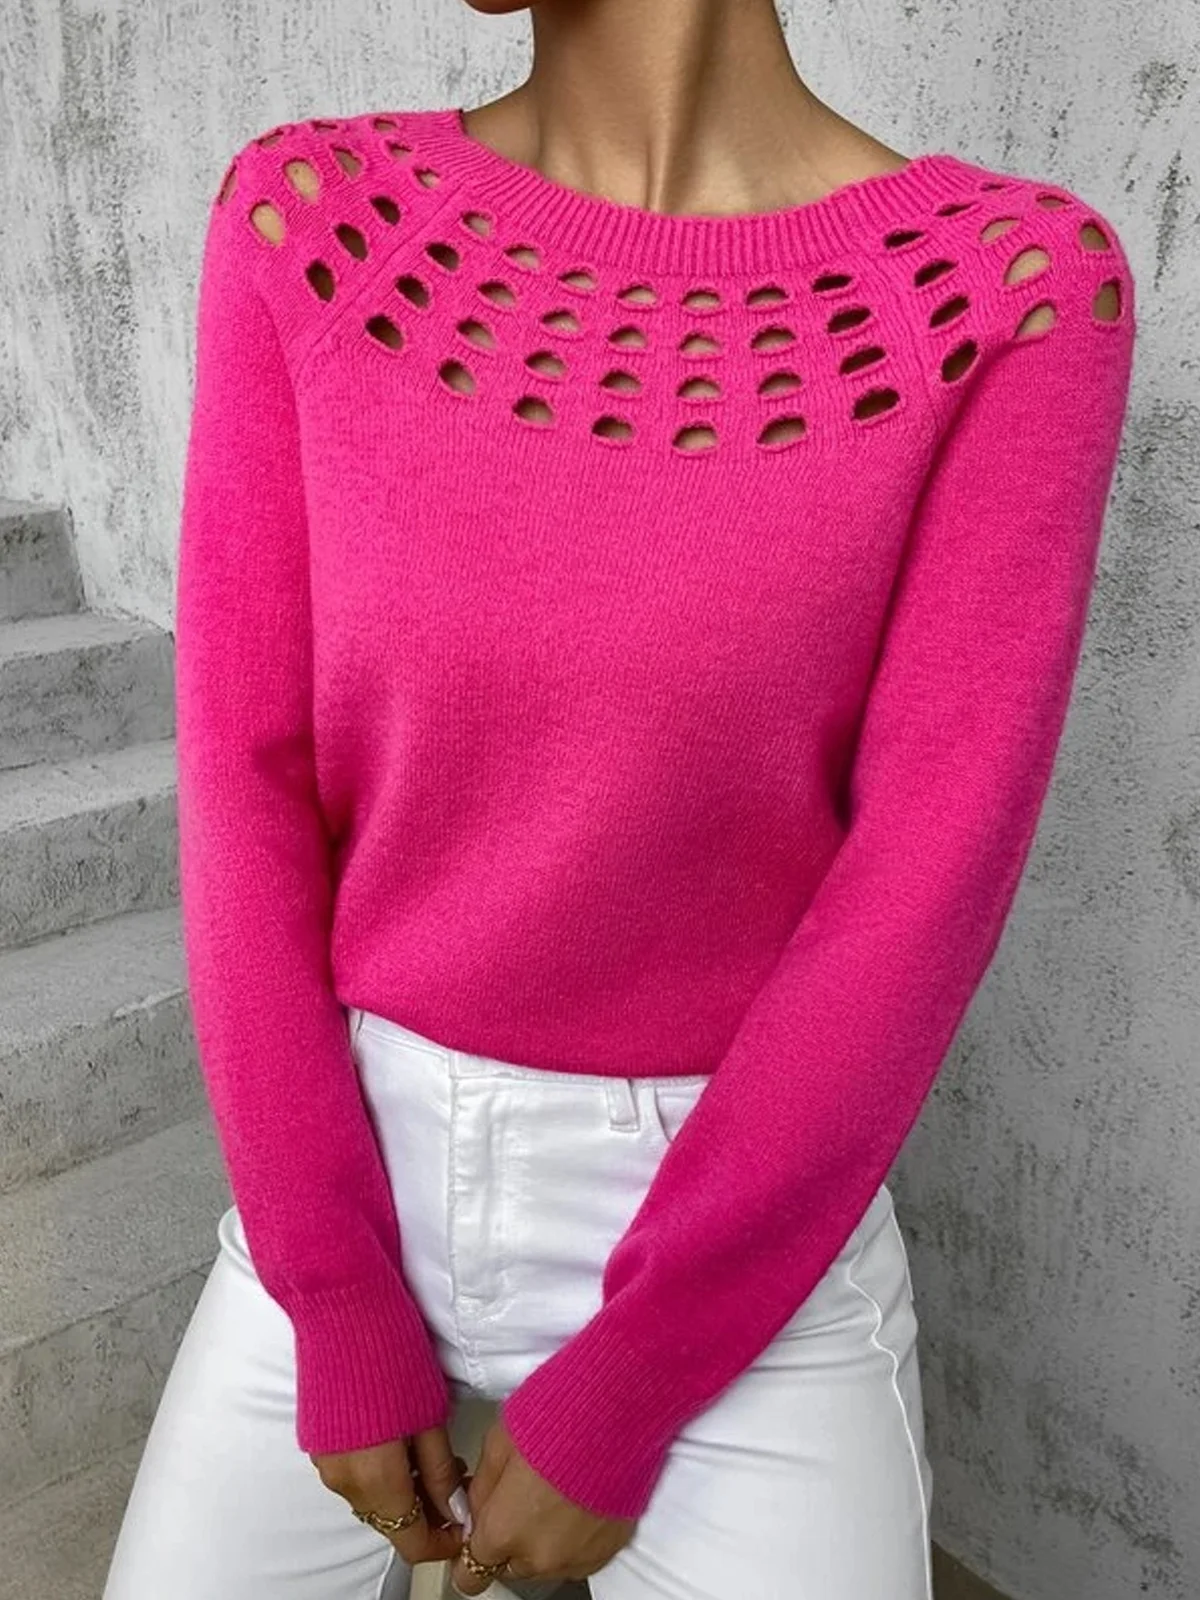 Crew Neck Plain Hollow Out Casual Pink Sweater Valentine's Day Top